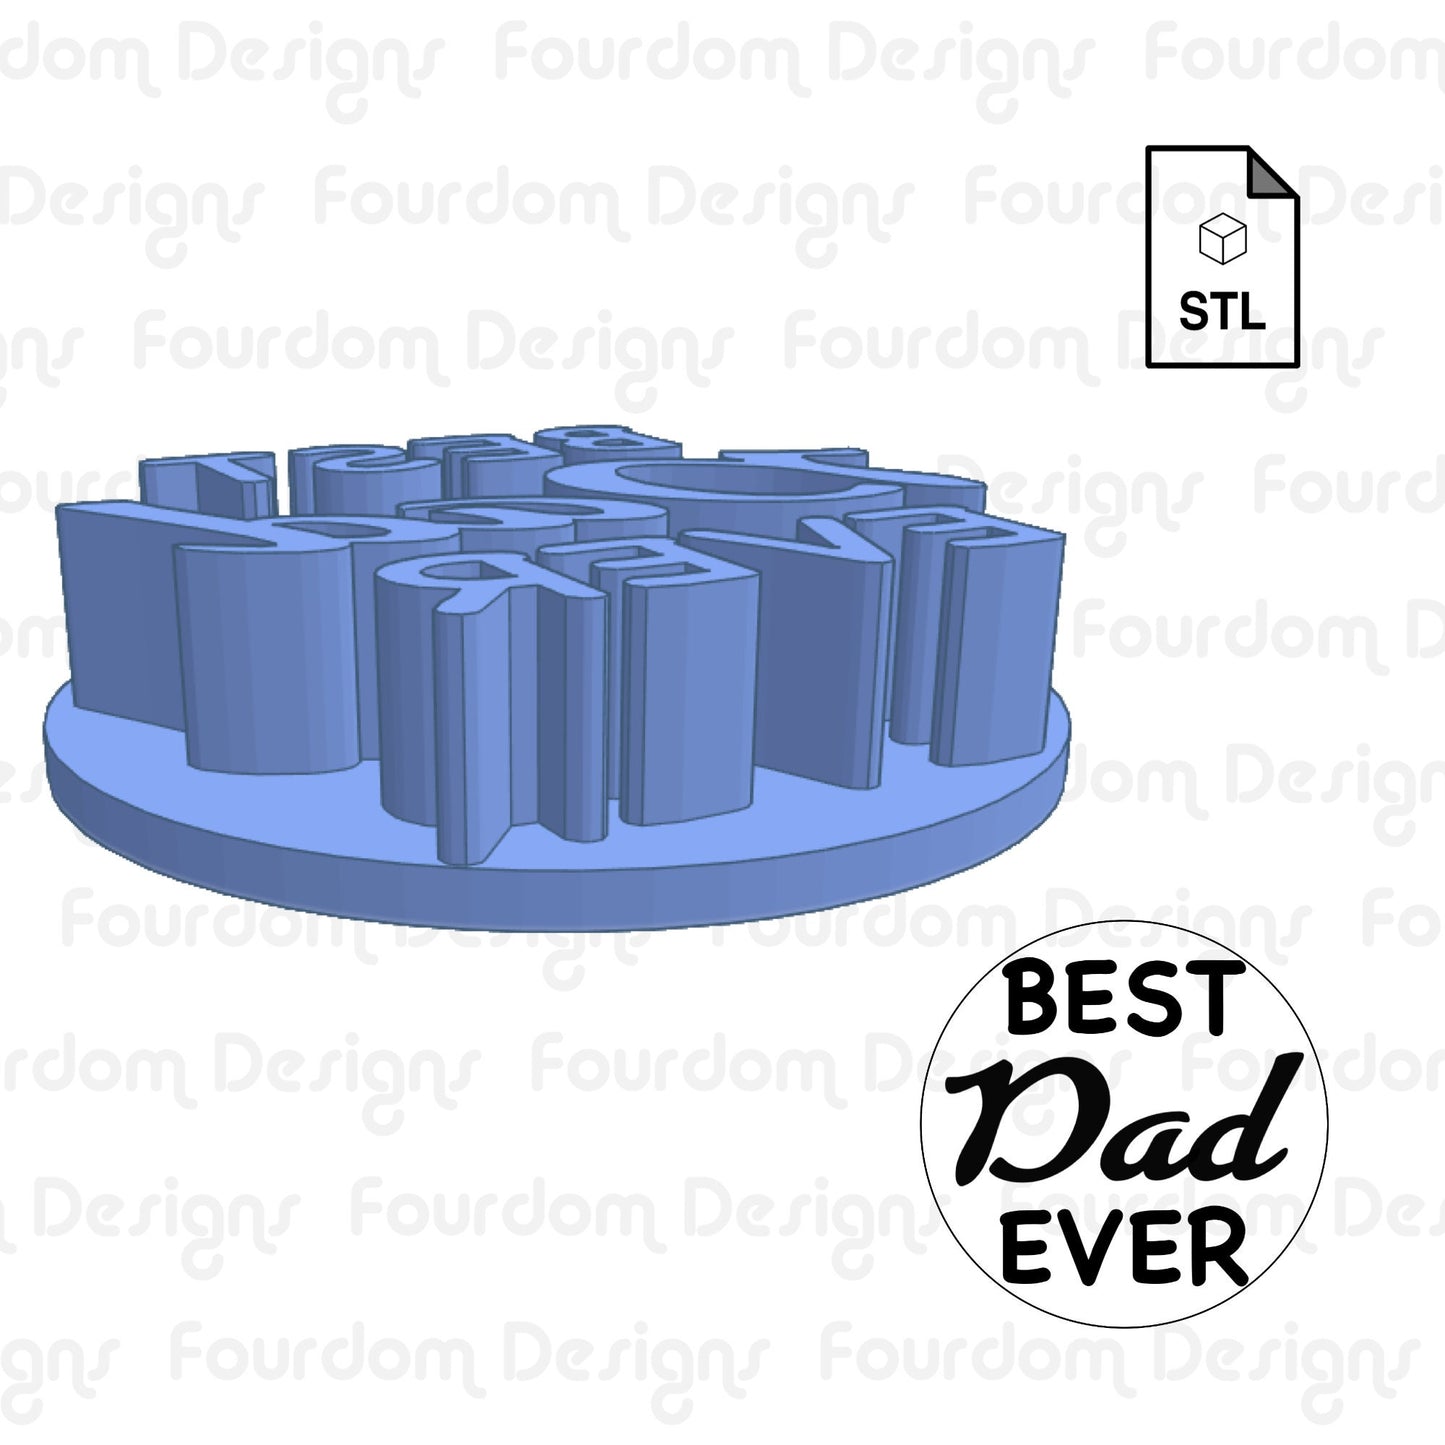 Best Dad Ever Cookie Imprint Digital Download STL File for Cookie Cutter Fondant Cutter Clay Cutter 3D Model for 3D Printing